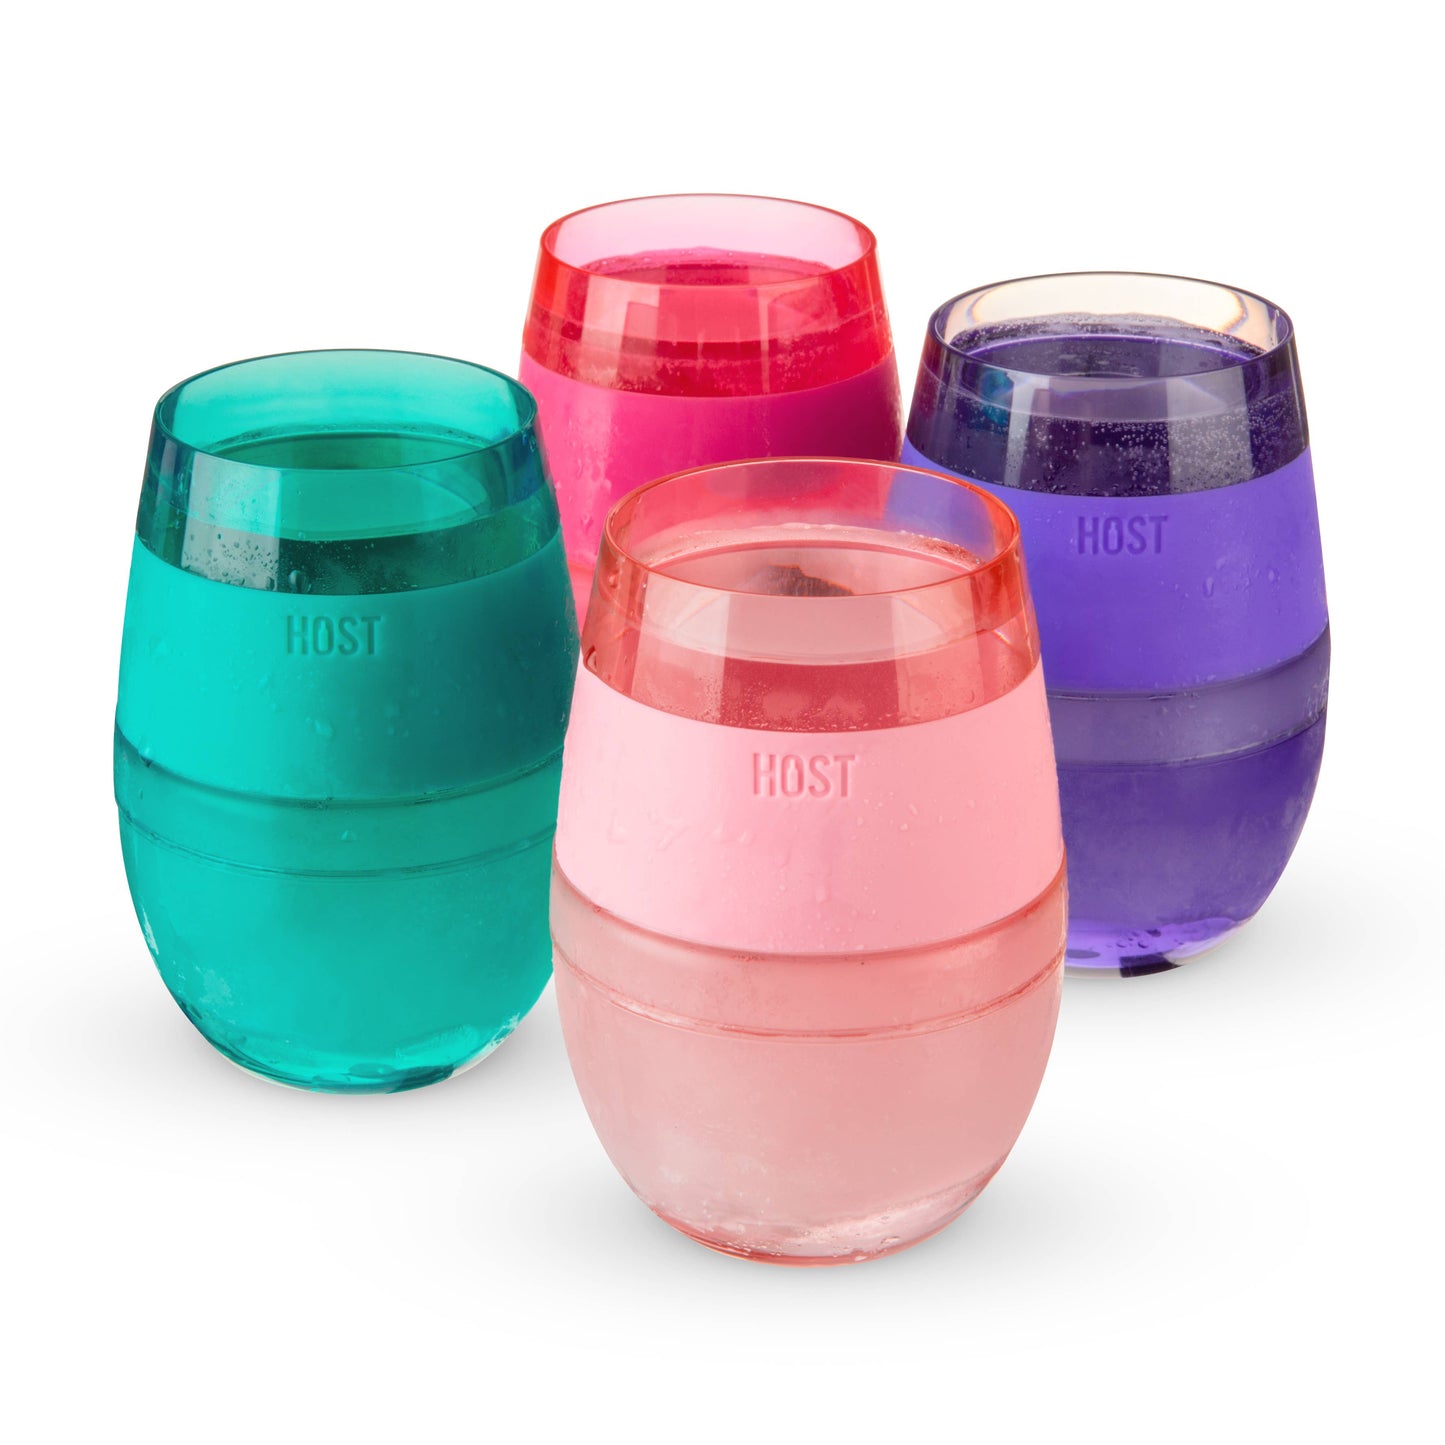 Wine FREEZE™ Cooling Cups Spring-Summer HOST